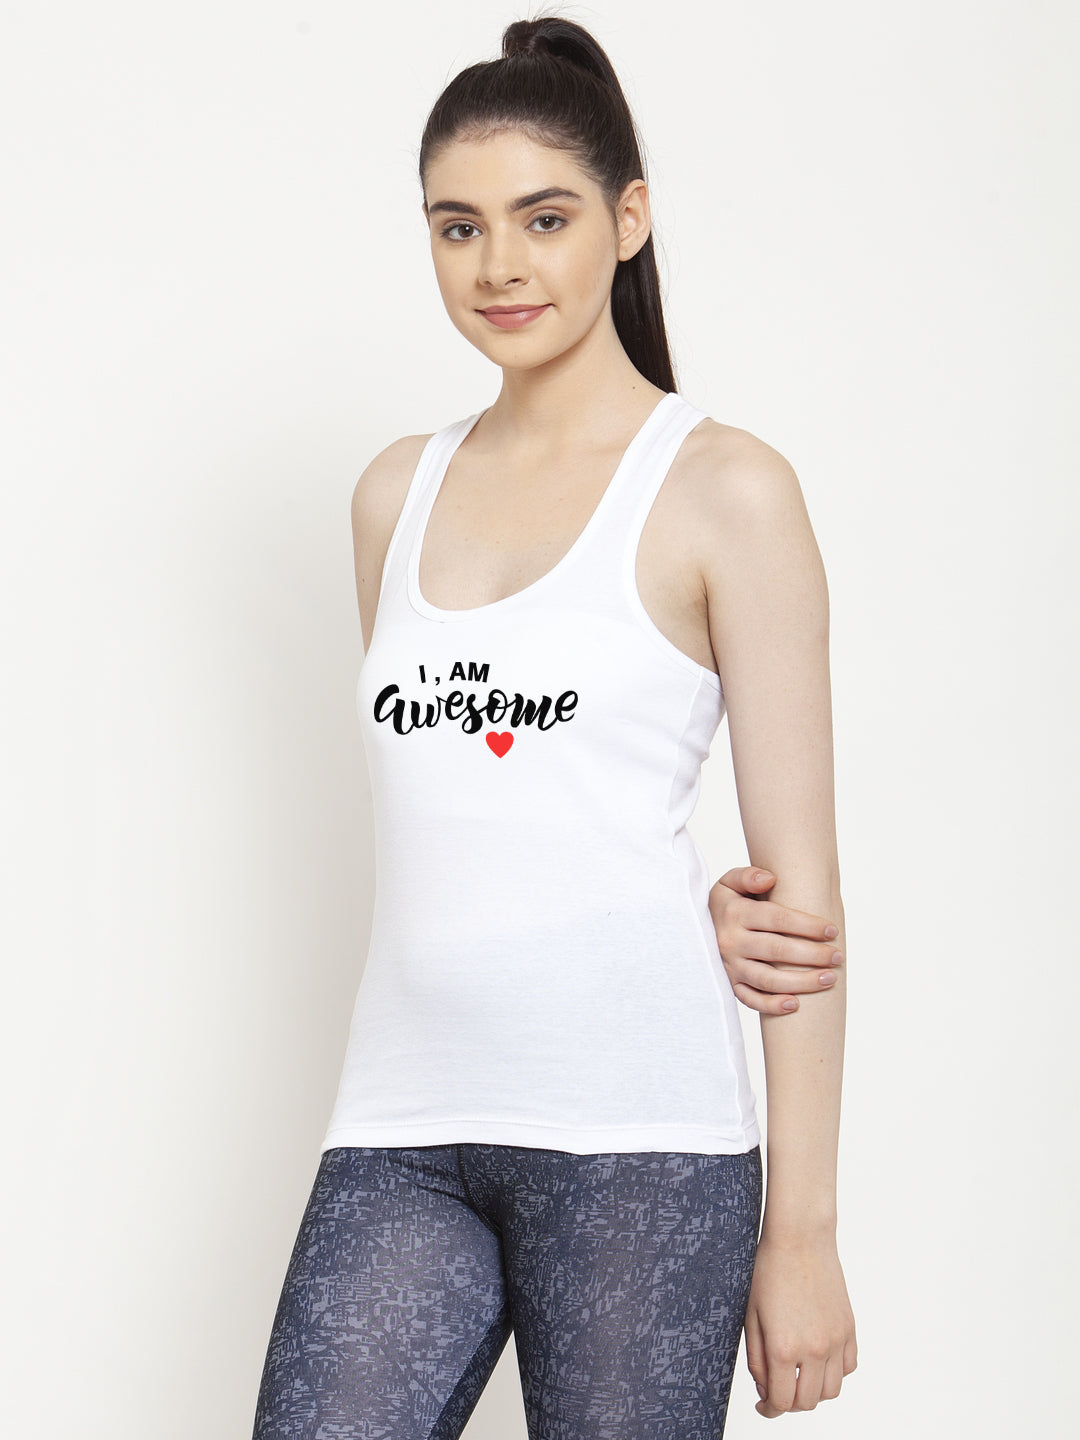 Awesome Printed Women Tank Top/Vest - Friskers